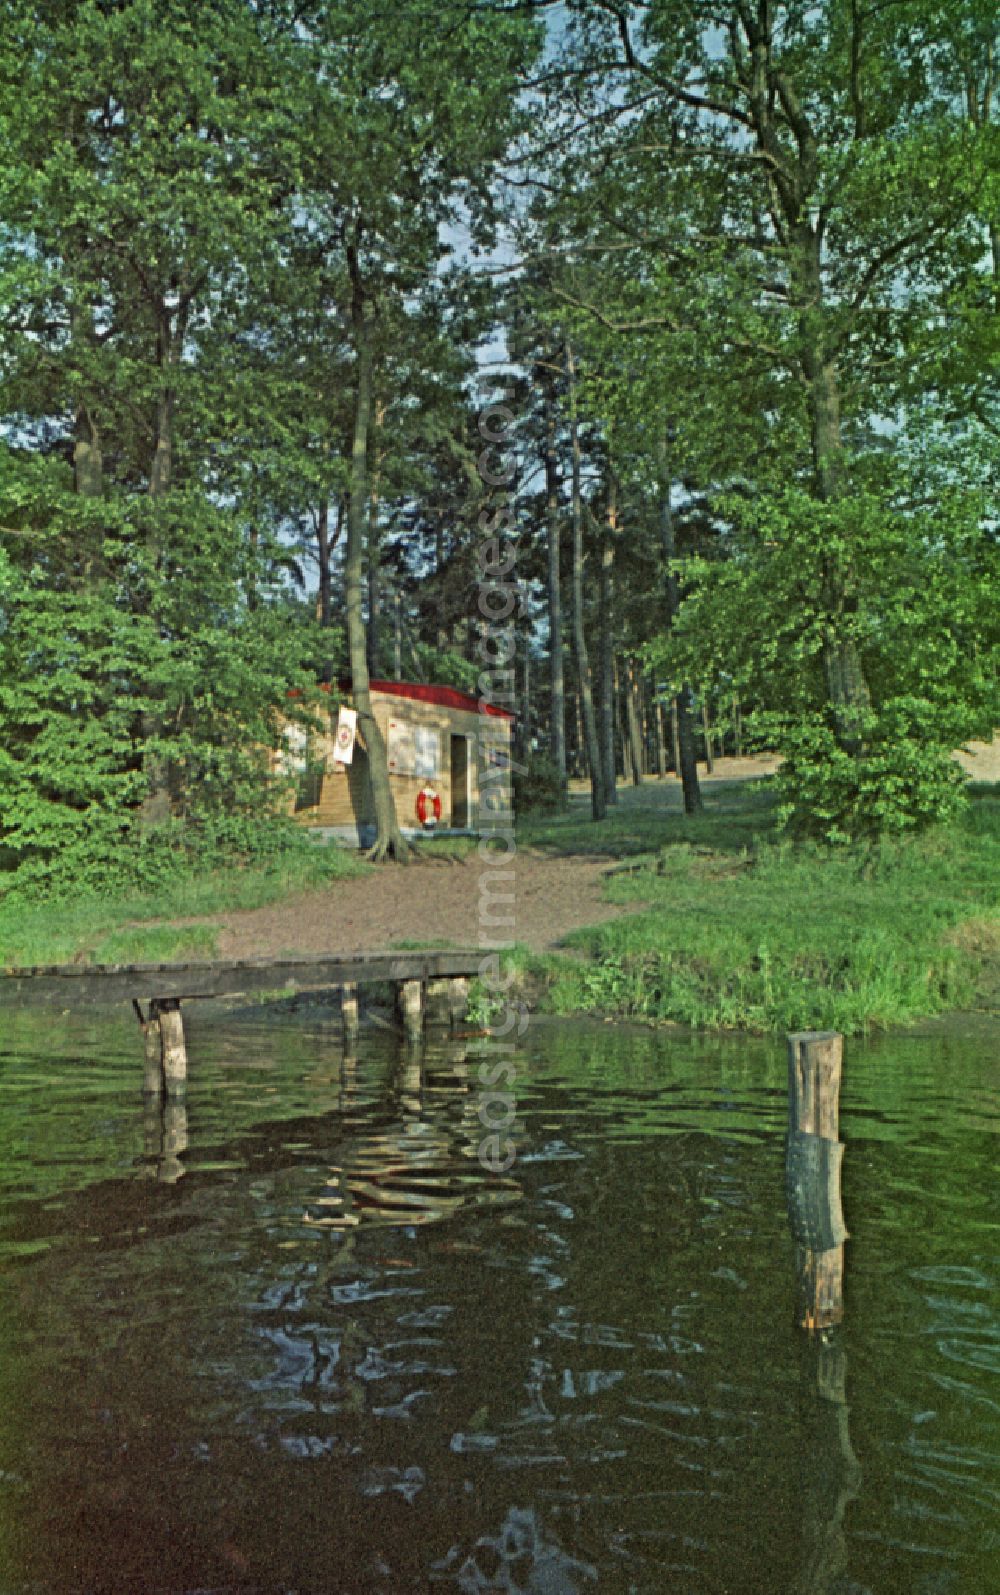 GDR image archive: Berlin - The DRK rescue swimming station at the Kleiner Mueggelsee in the district Treptow in Berlin East Berlin on the territory of the former GDR, German Democratic Republic